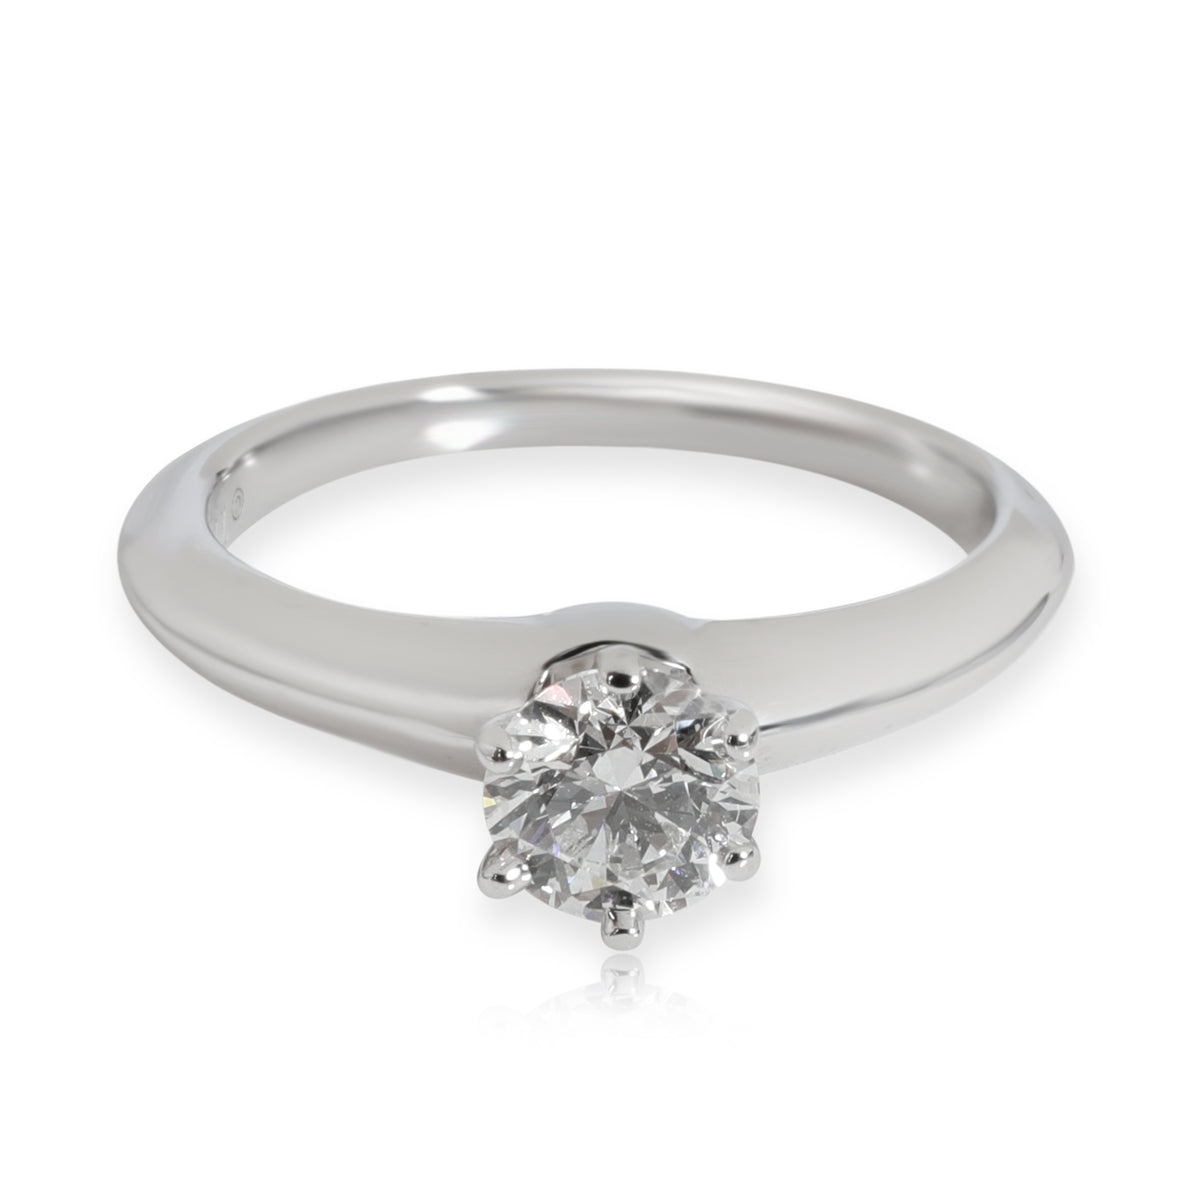 Tiffany & Co. Solitaire Diamond Engagement Ring in Platinum G VS2 0.59 CTW